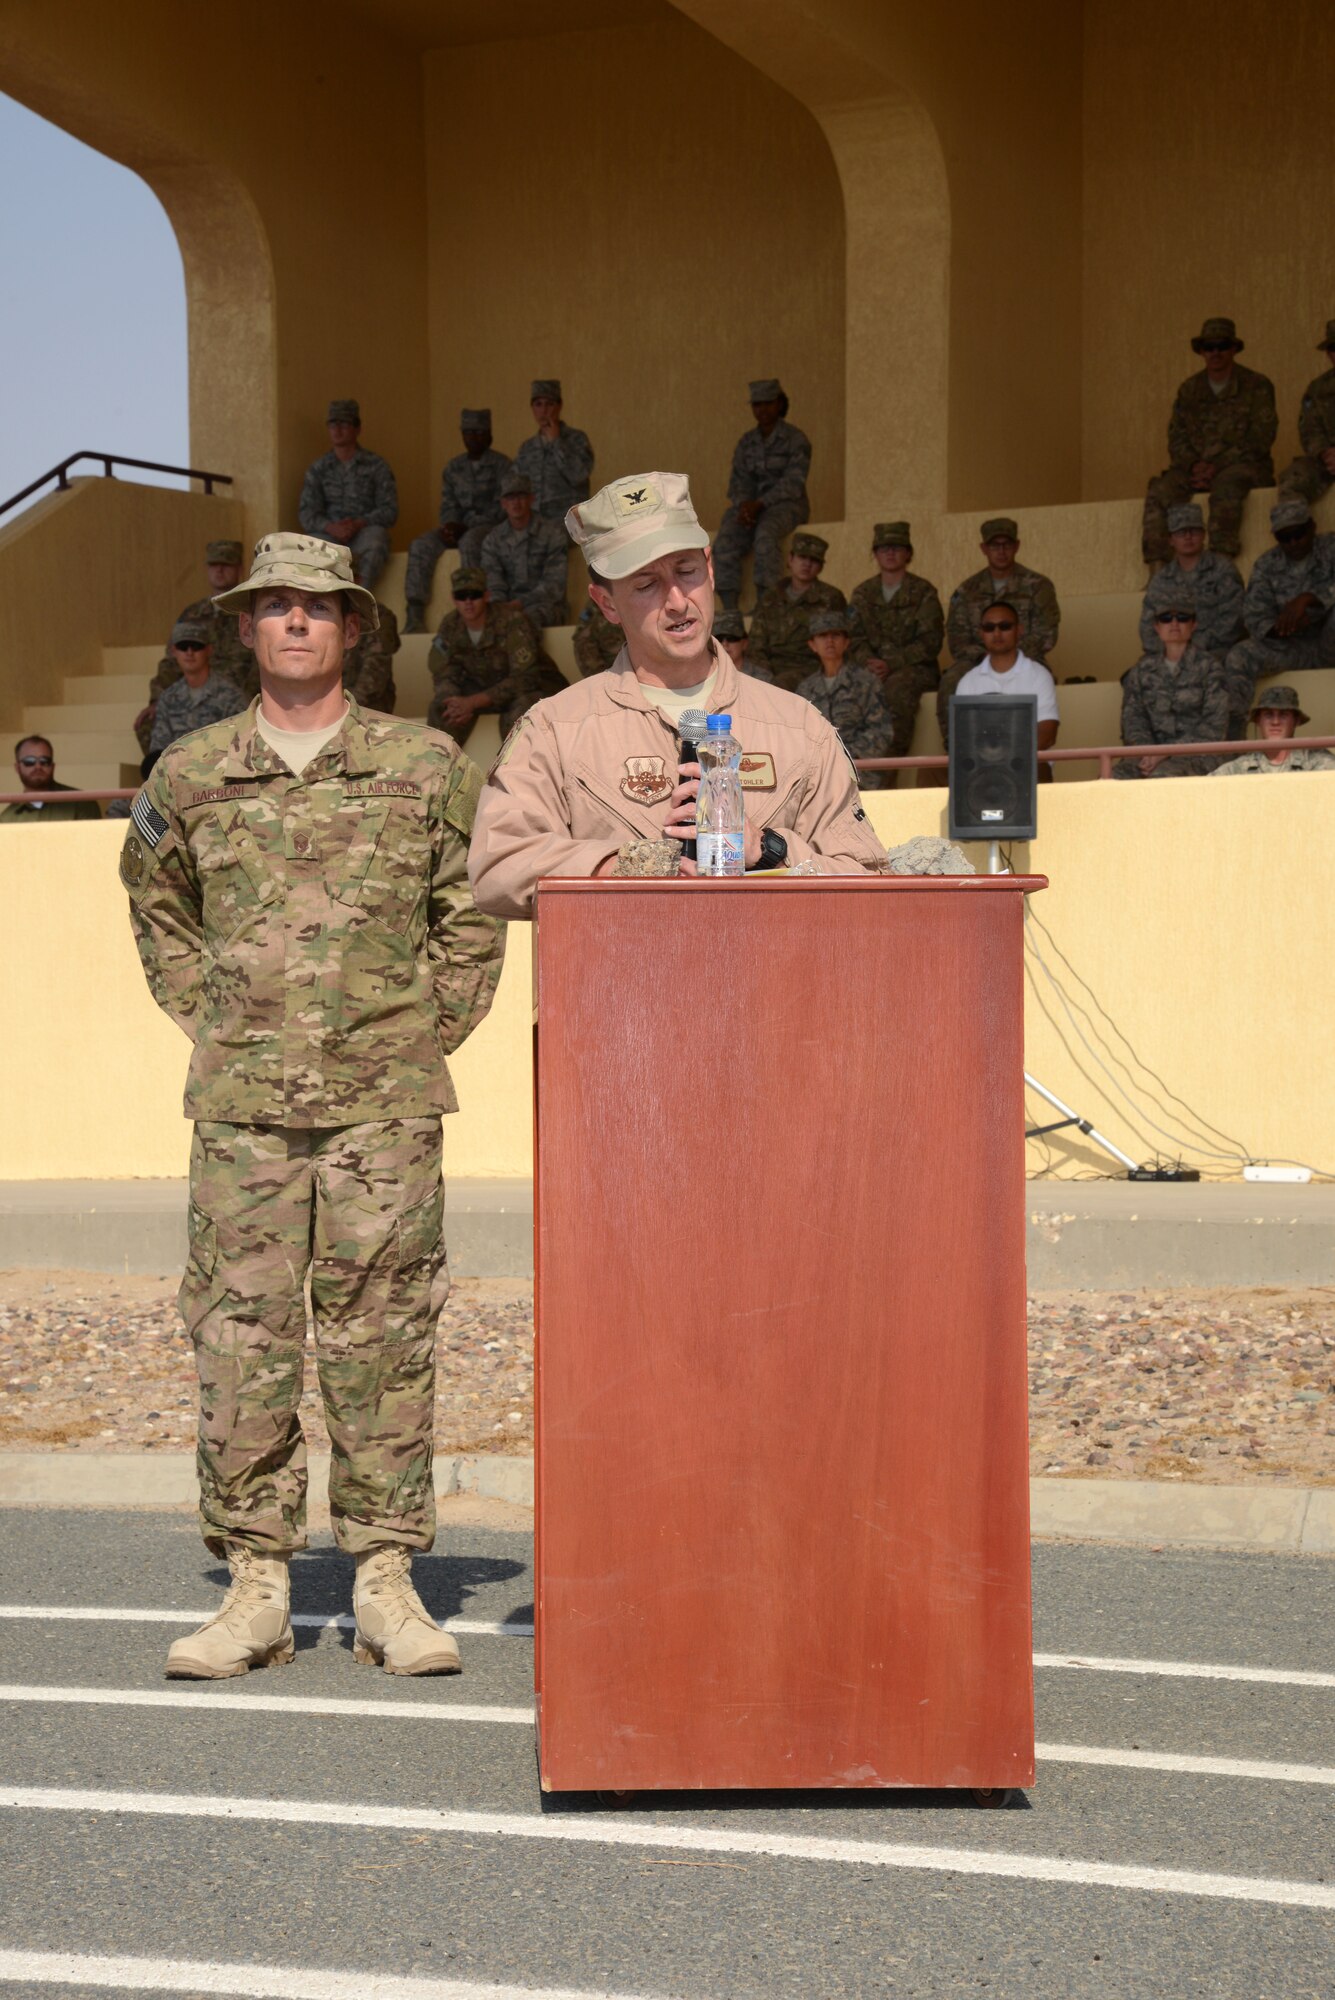 SOUTHWEST ASIA - Col. Michael Stohler, 332nd Air Expeditionary Group commander, speaks during the 332nd AEG reactivation and assumption of command ceremony Nov. 16, 2014. The 332nd AEG has a storied history and is descended from the 332nd Fighter Group - the famed Tuskegee Airmen, also known as the Red Tails. (U.S. Air Force photo by Tech. Sgt. Jared Marquis/released)  